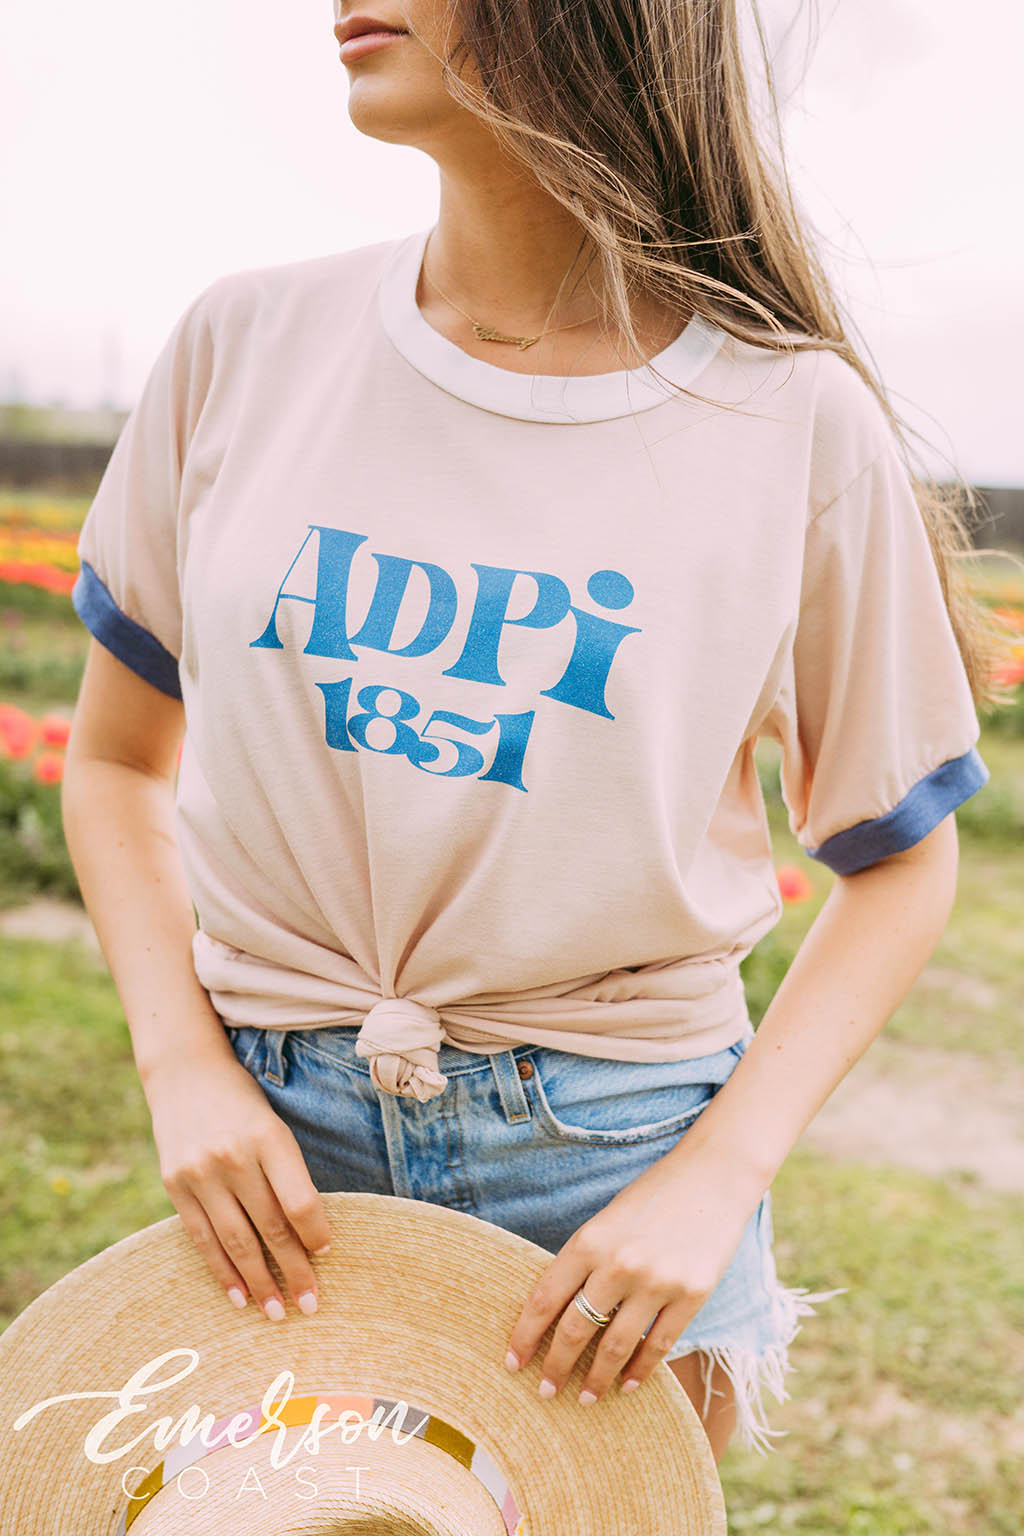 Girl sits in tulip field wearing a white ADPi 1851 ringer tshirt.